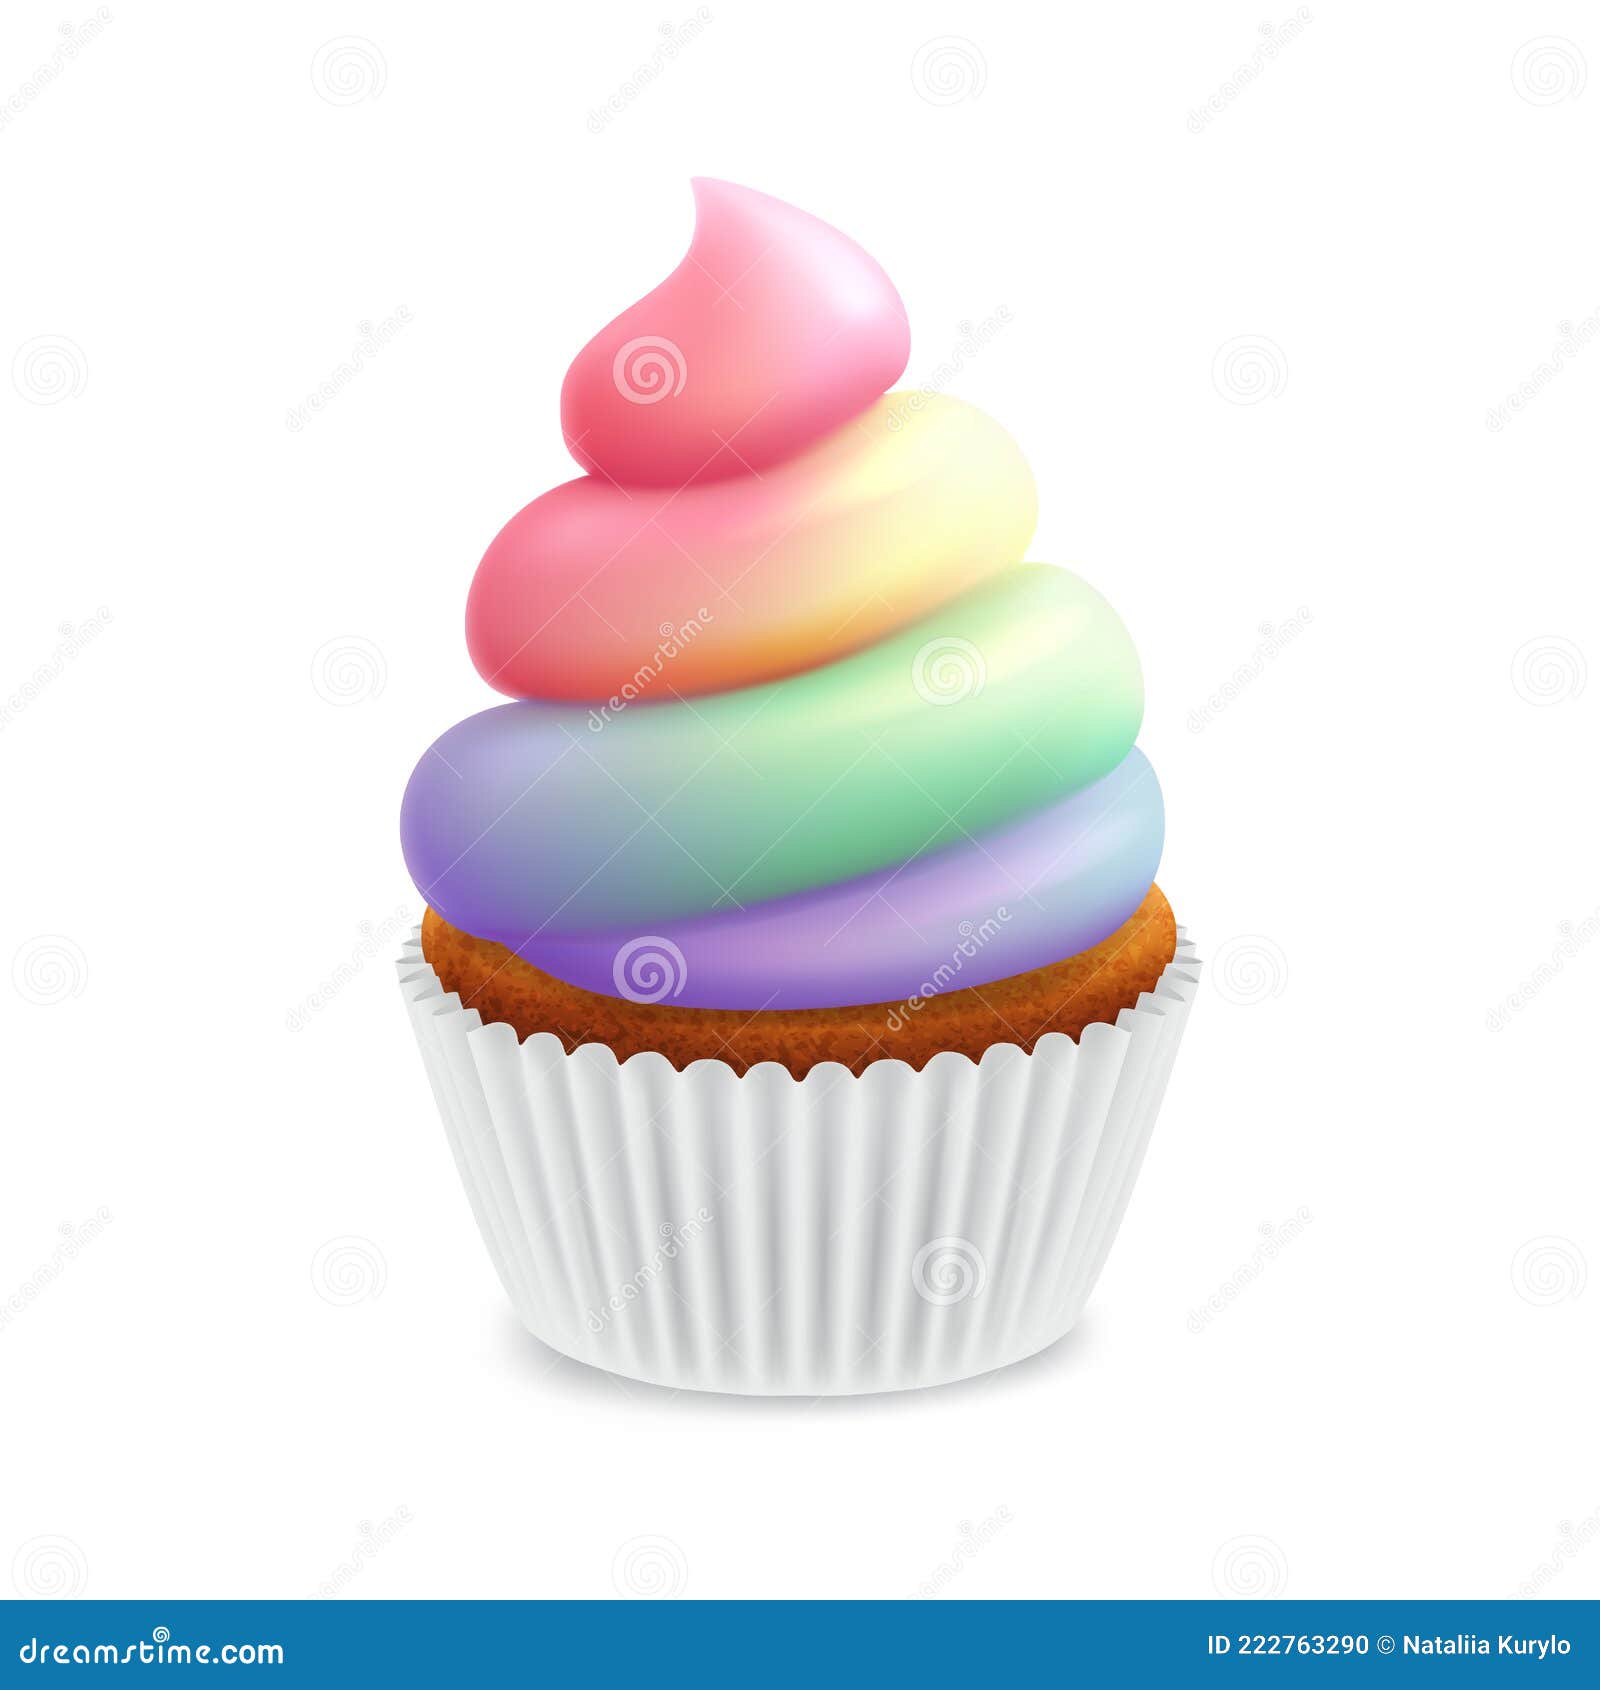 It's Time for Unicorn Poop Cupcakes at Nadia Cakes - CCX Media